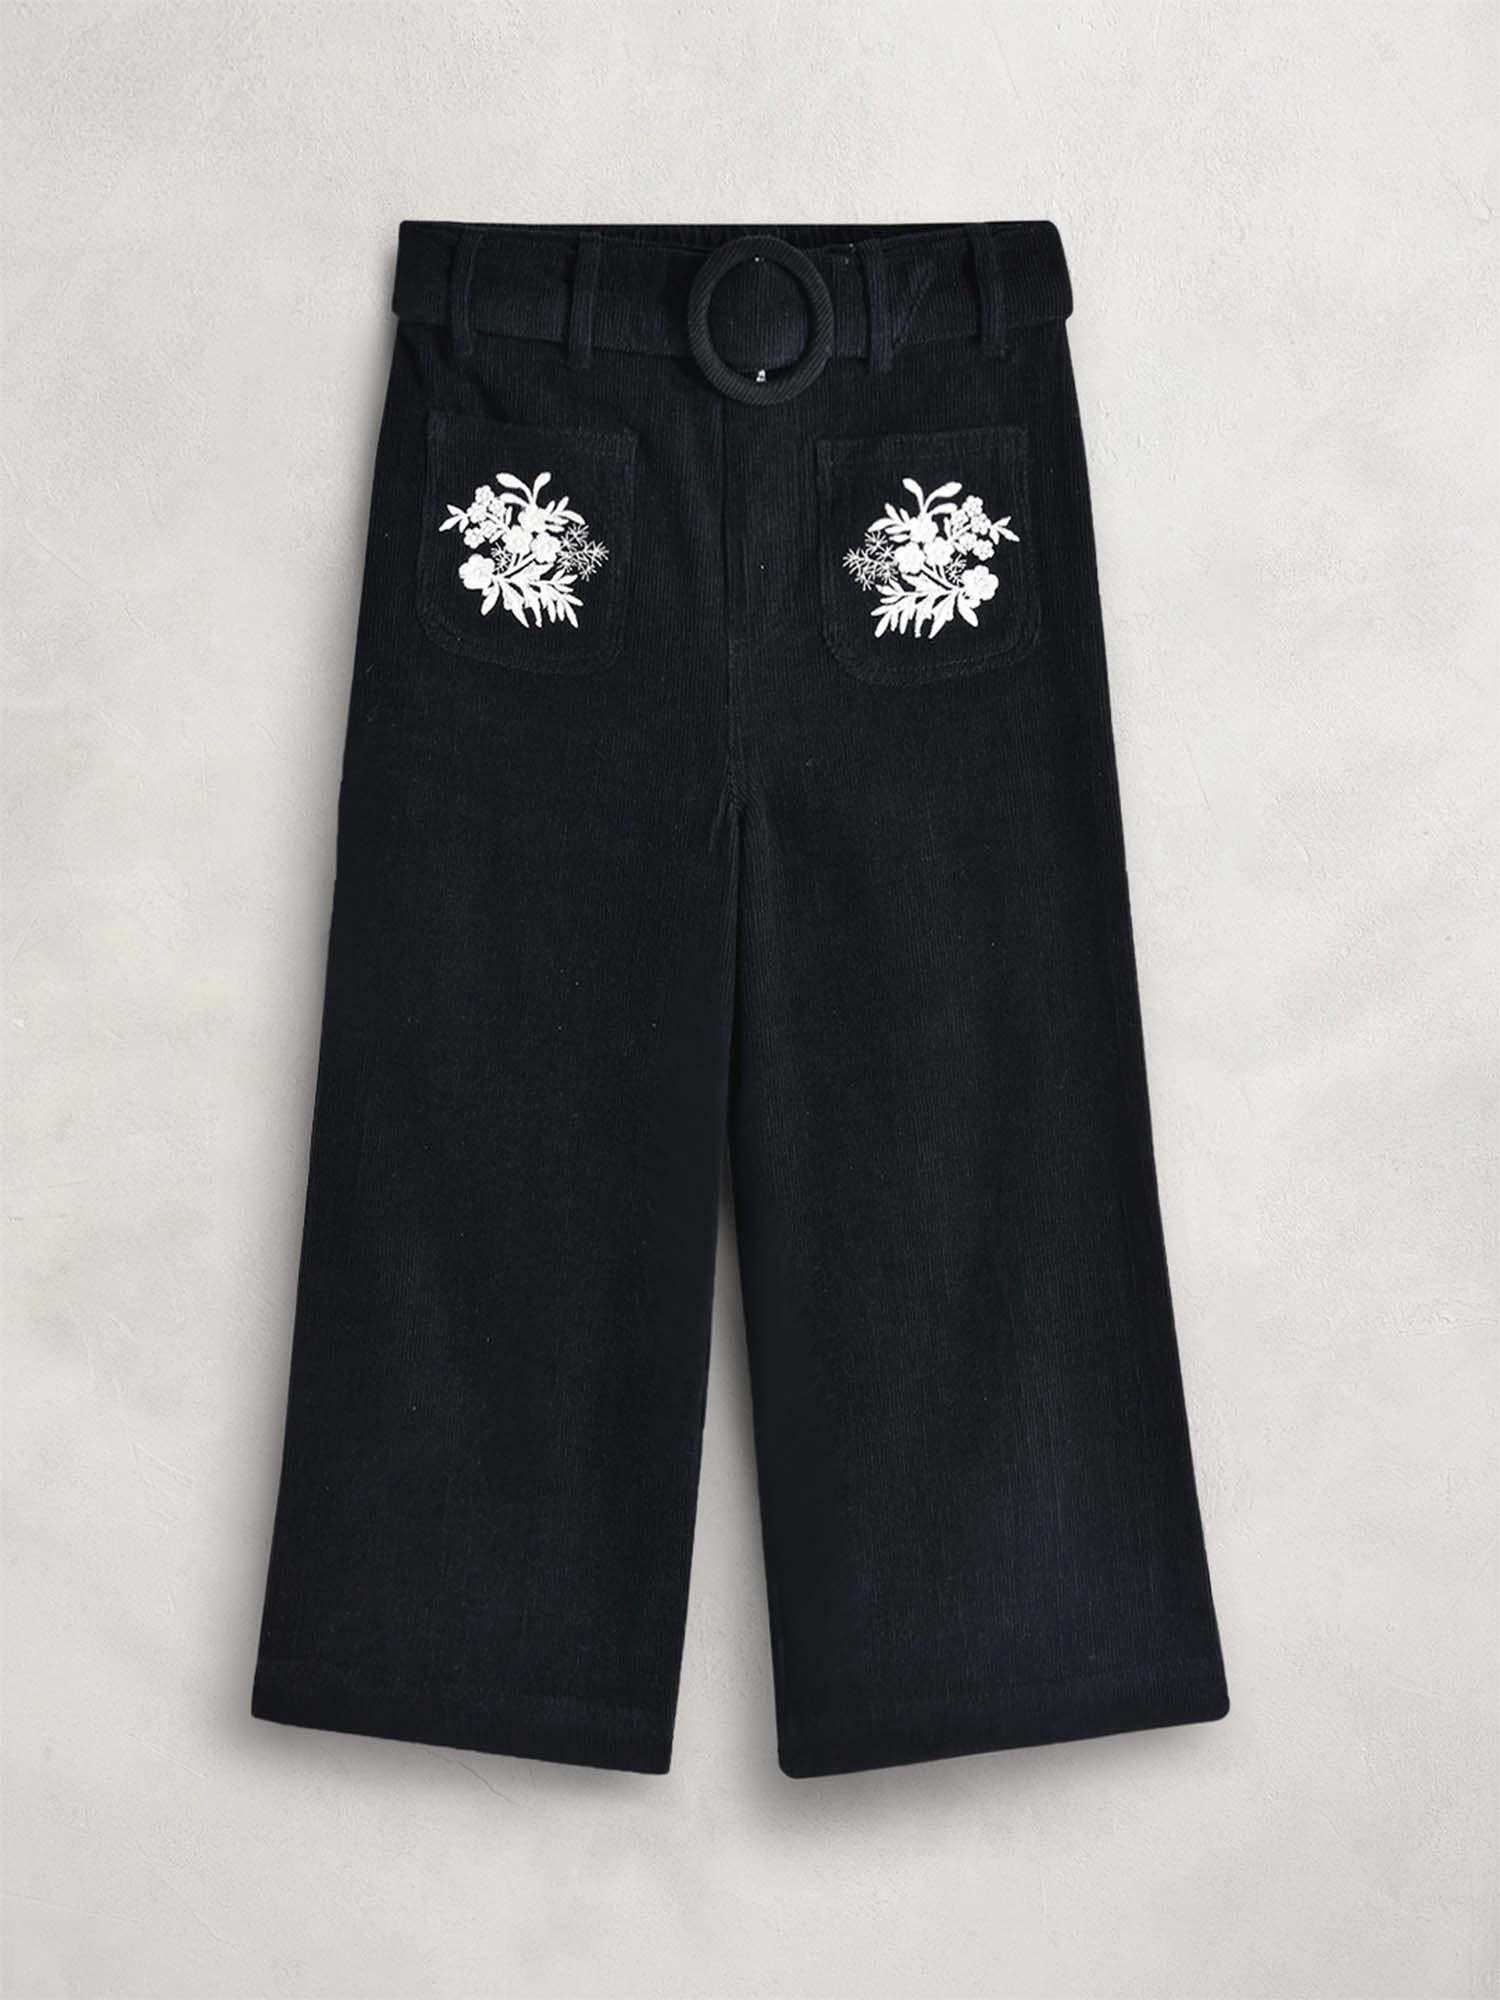 black-floral-embroidery-gala-trousers